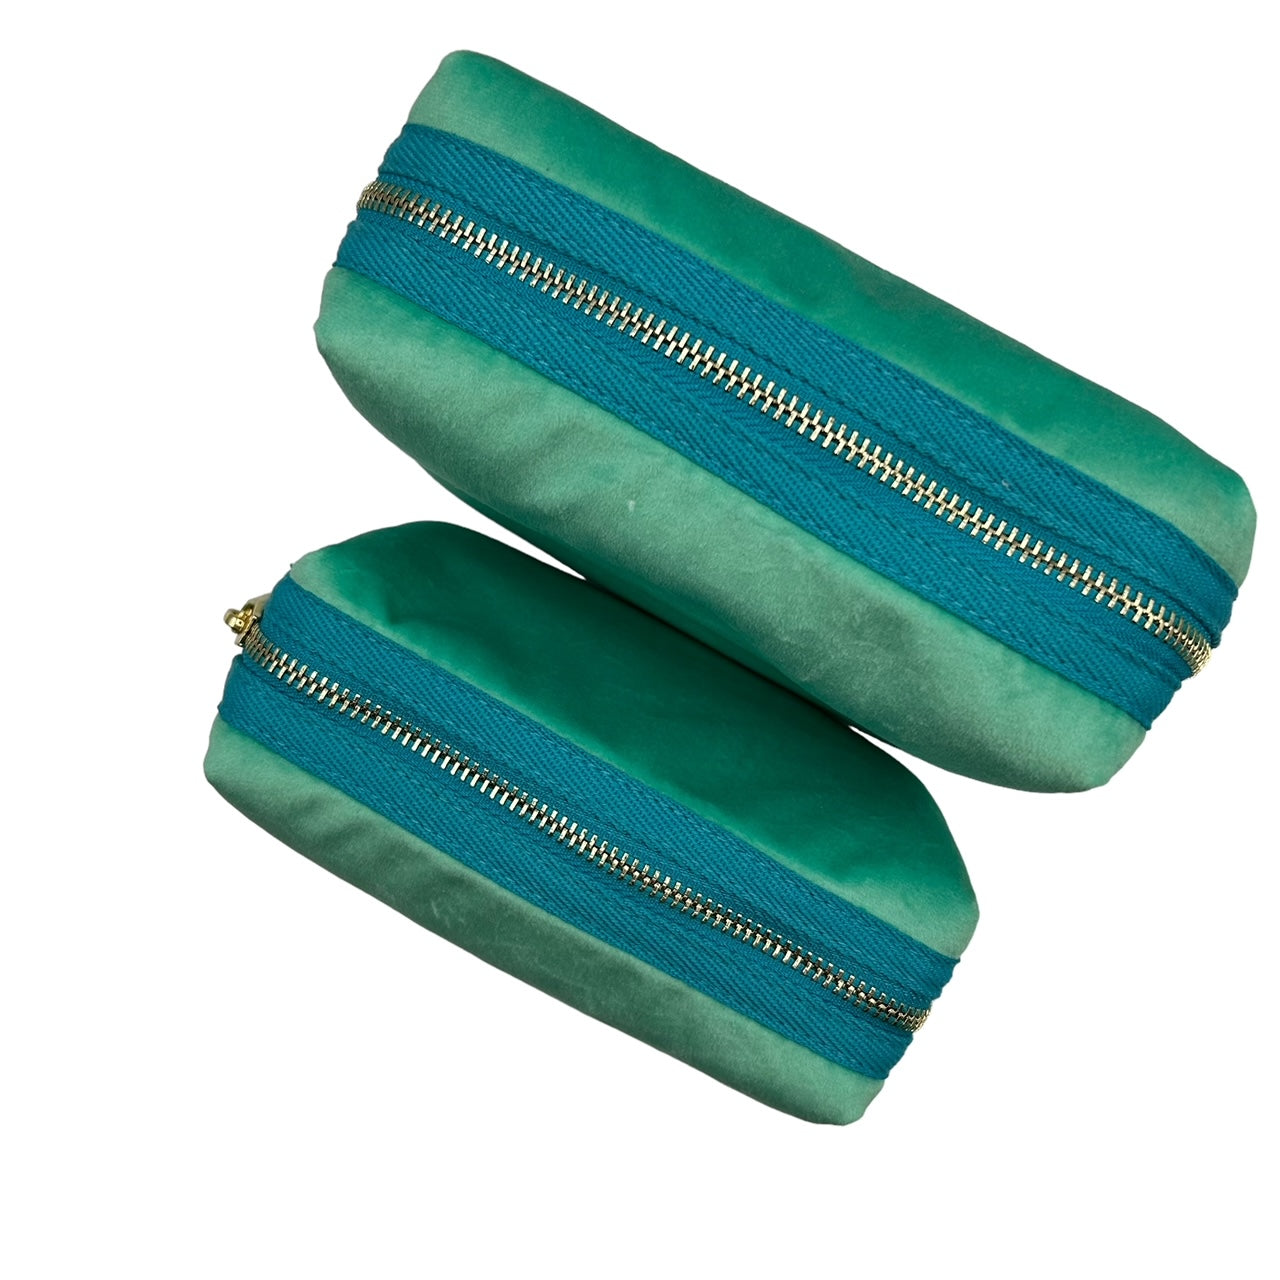 Marine make-up bag & mint shell brooch - recycled velvet, large and small